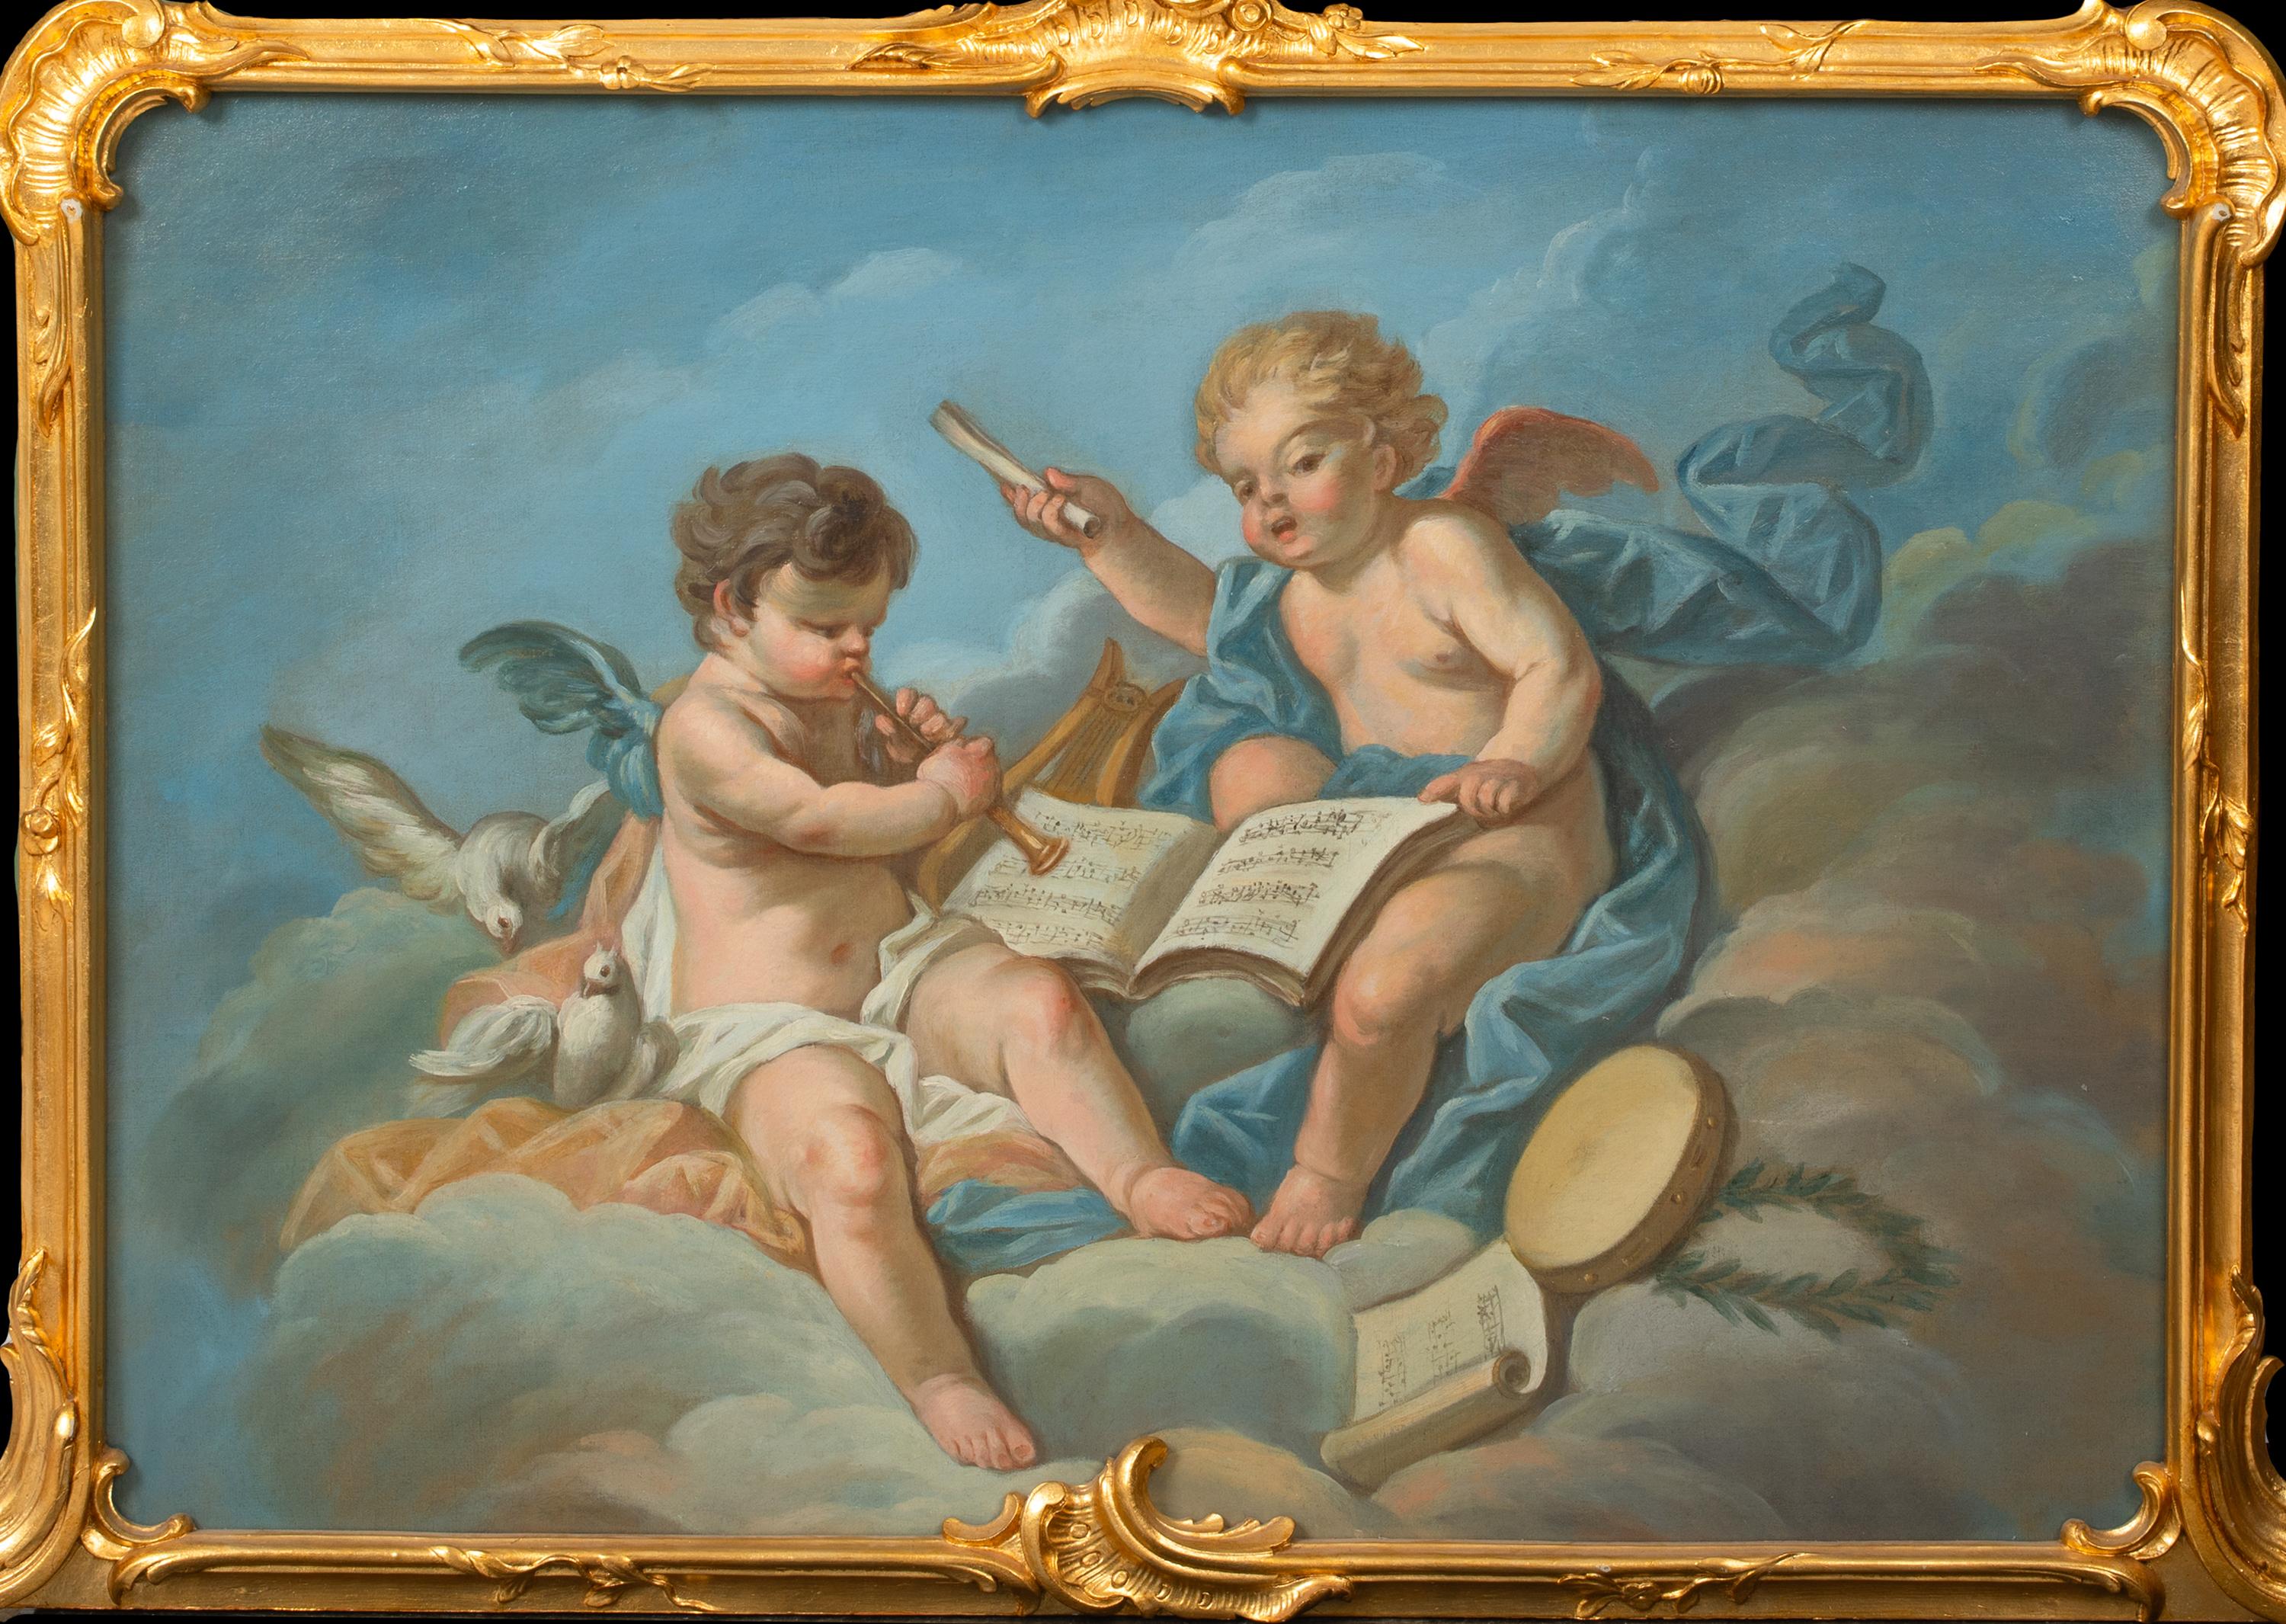 An Allegory of Music, 18th Century

School of François BOUCHER (1703-1770)

One of a set of Three 

Large 18th Century French allegory of Music, oil on canvas. Excellent quality and condition allegorical study of cherubs reciting a piece of music in